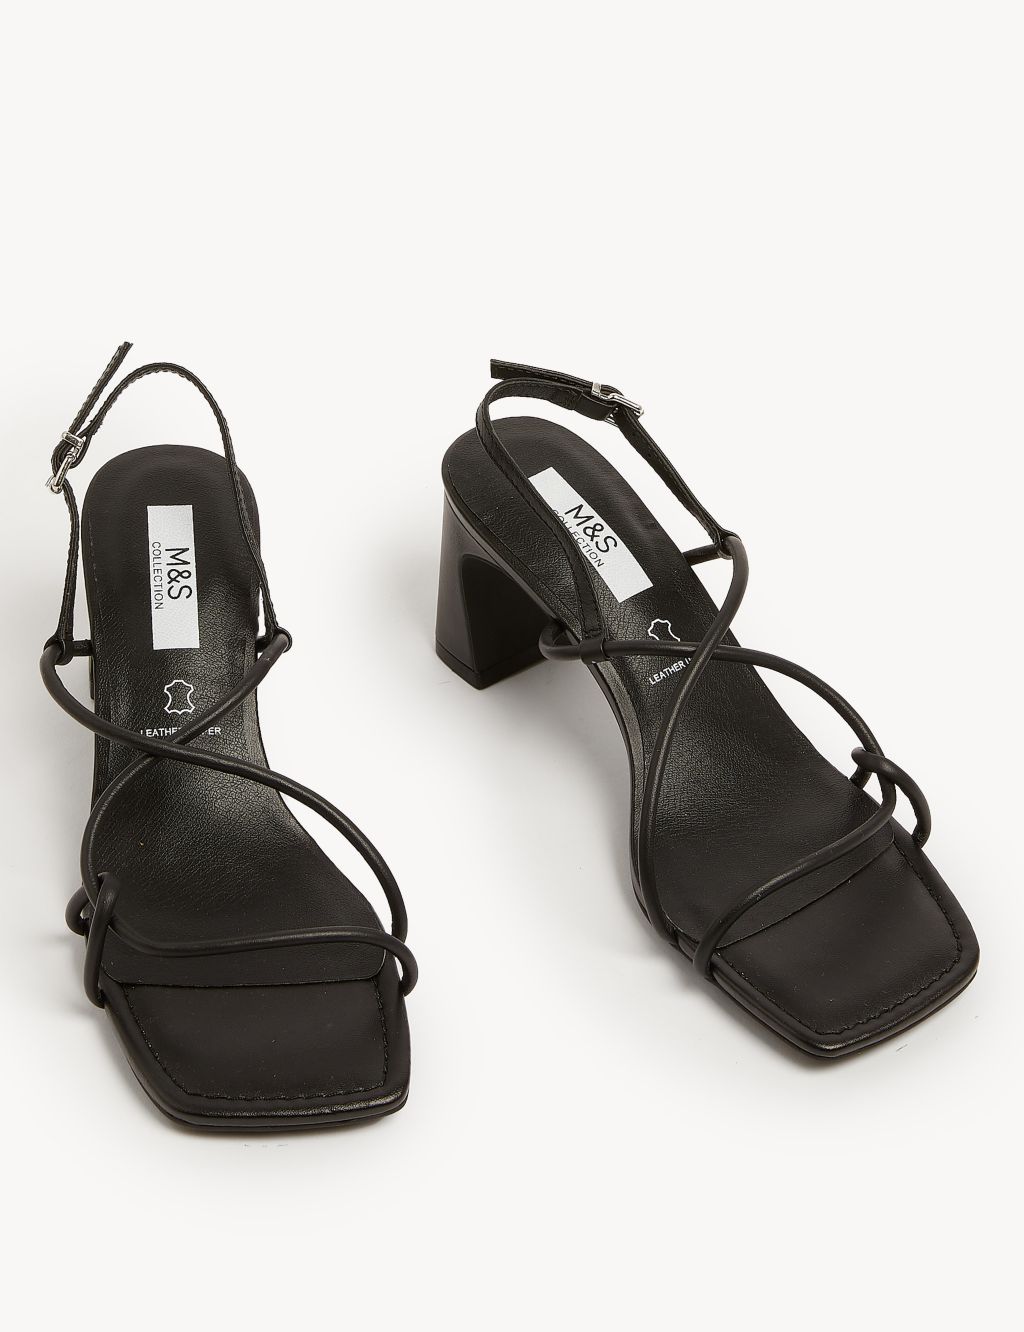 Leather Strappy Statement Sandals image 2